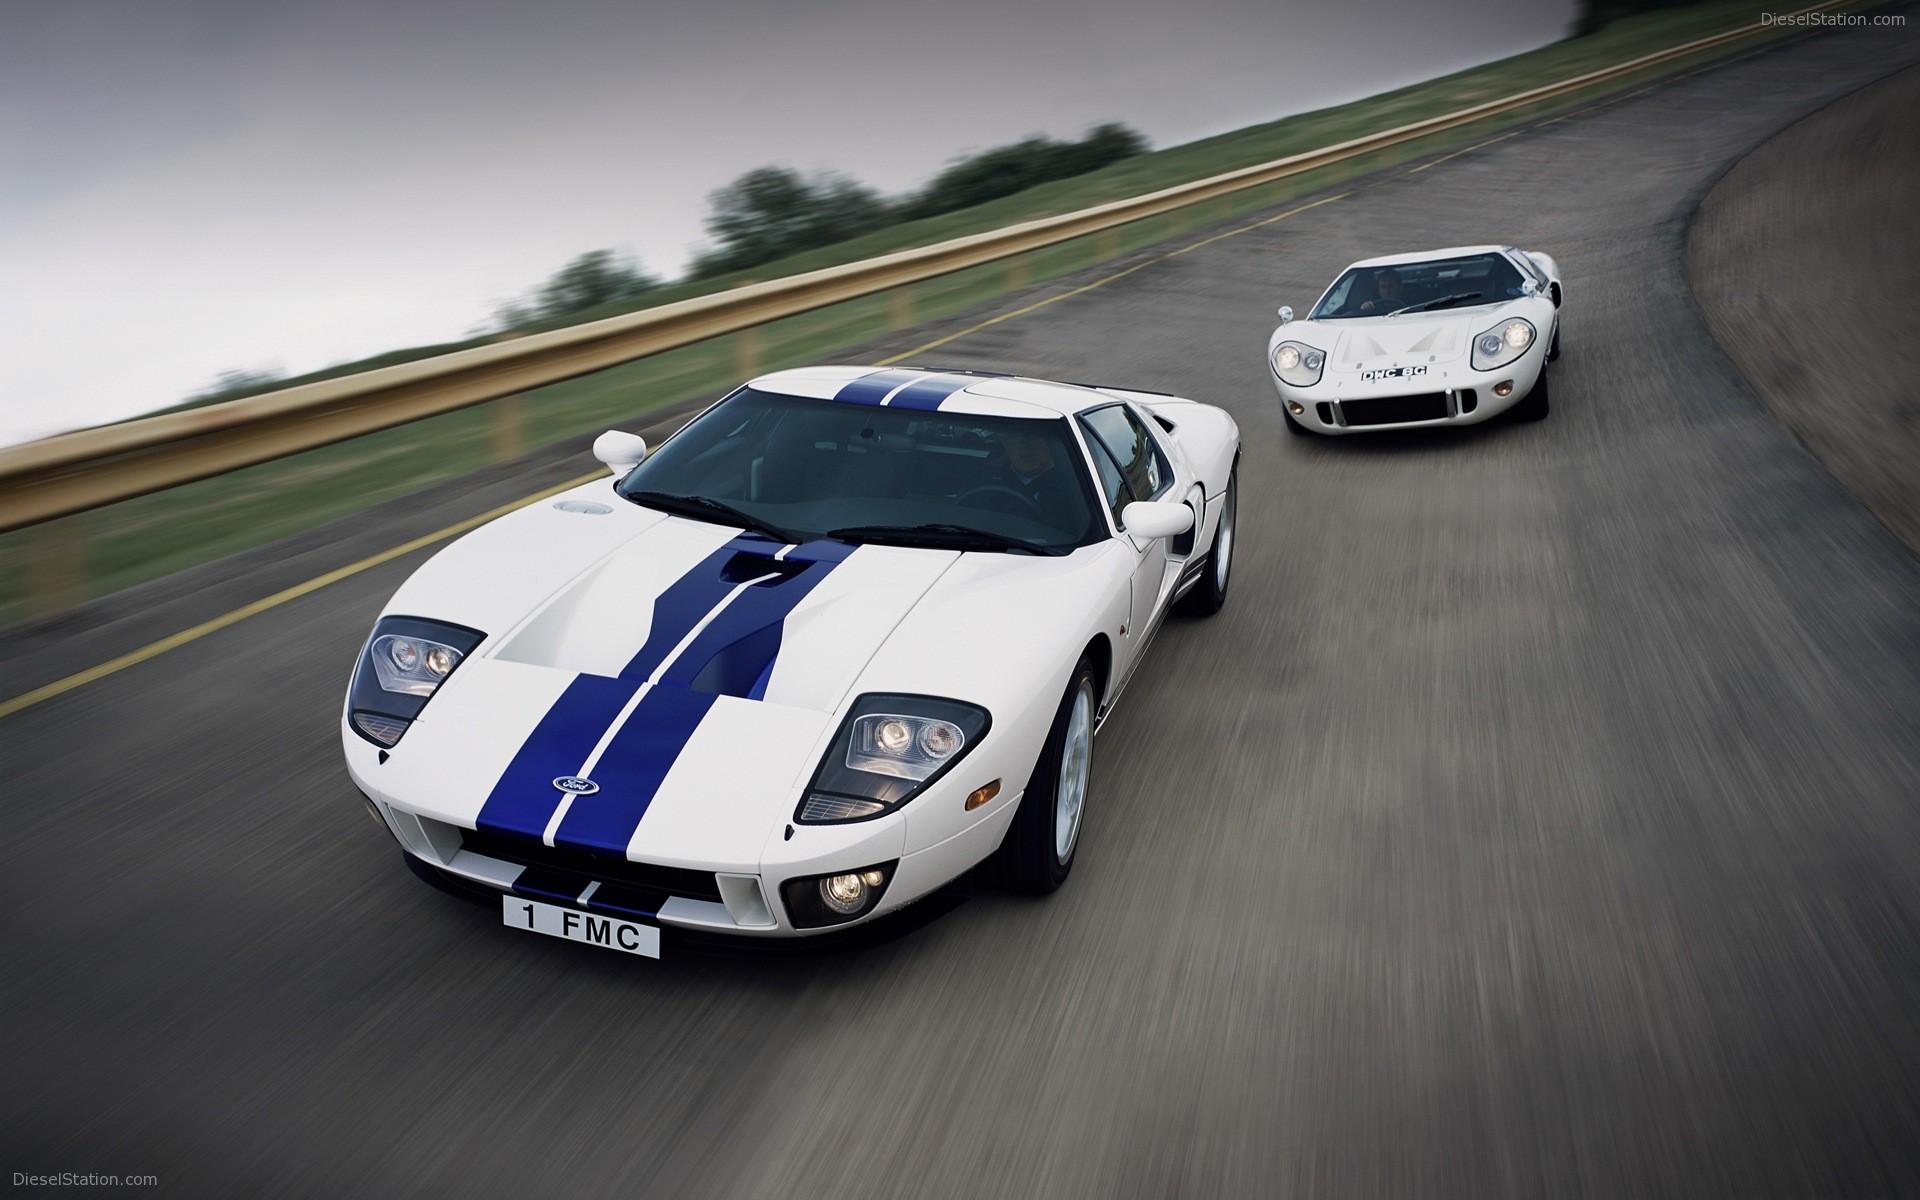 Ford GT Widescreen Exotic Car Wallpaper of 244, Diesel Station